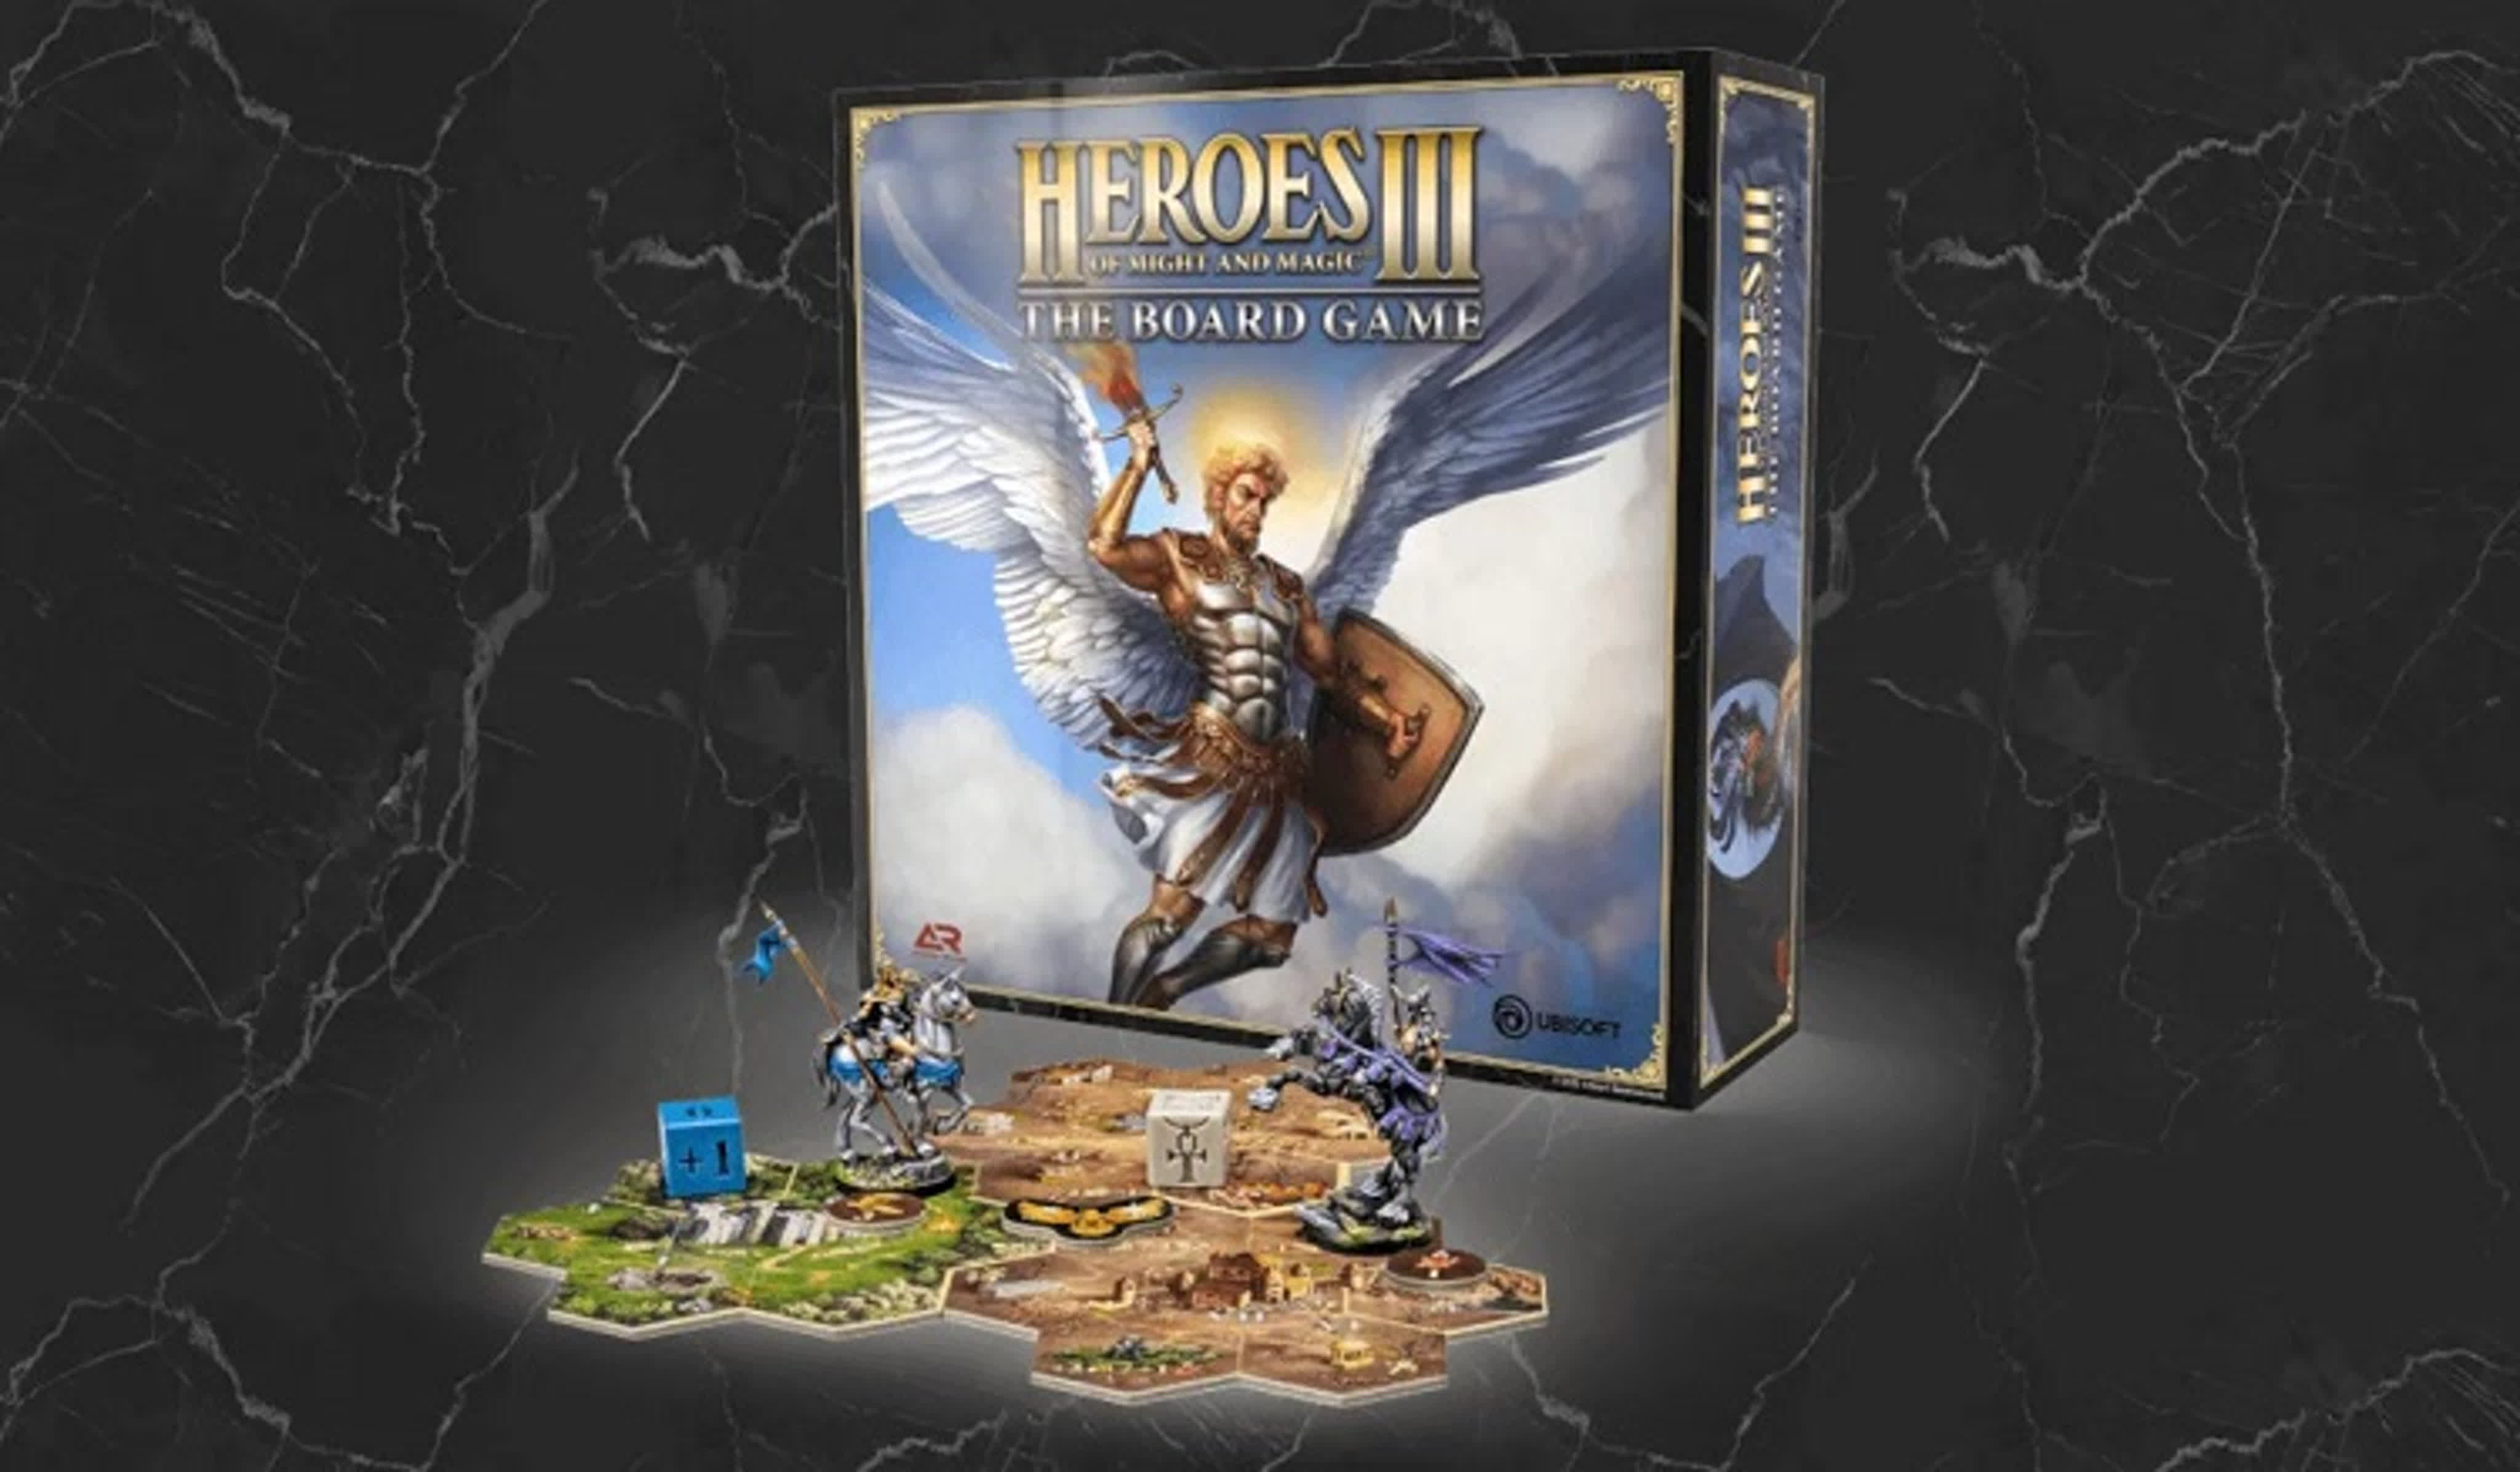 Heroes of might and magic iii the board game watch online